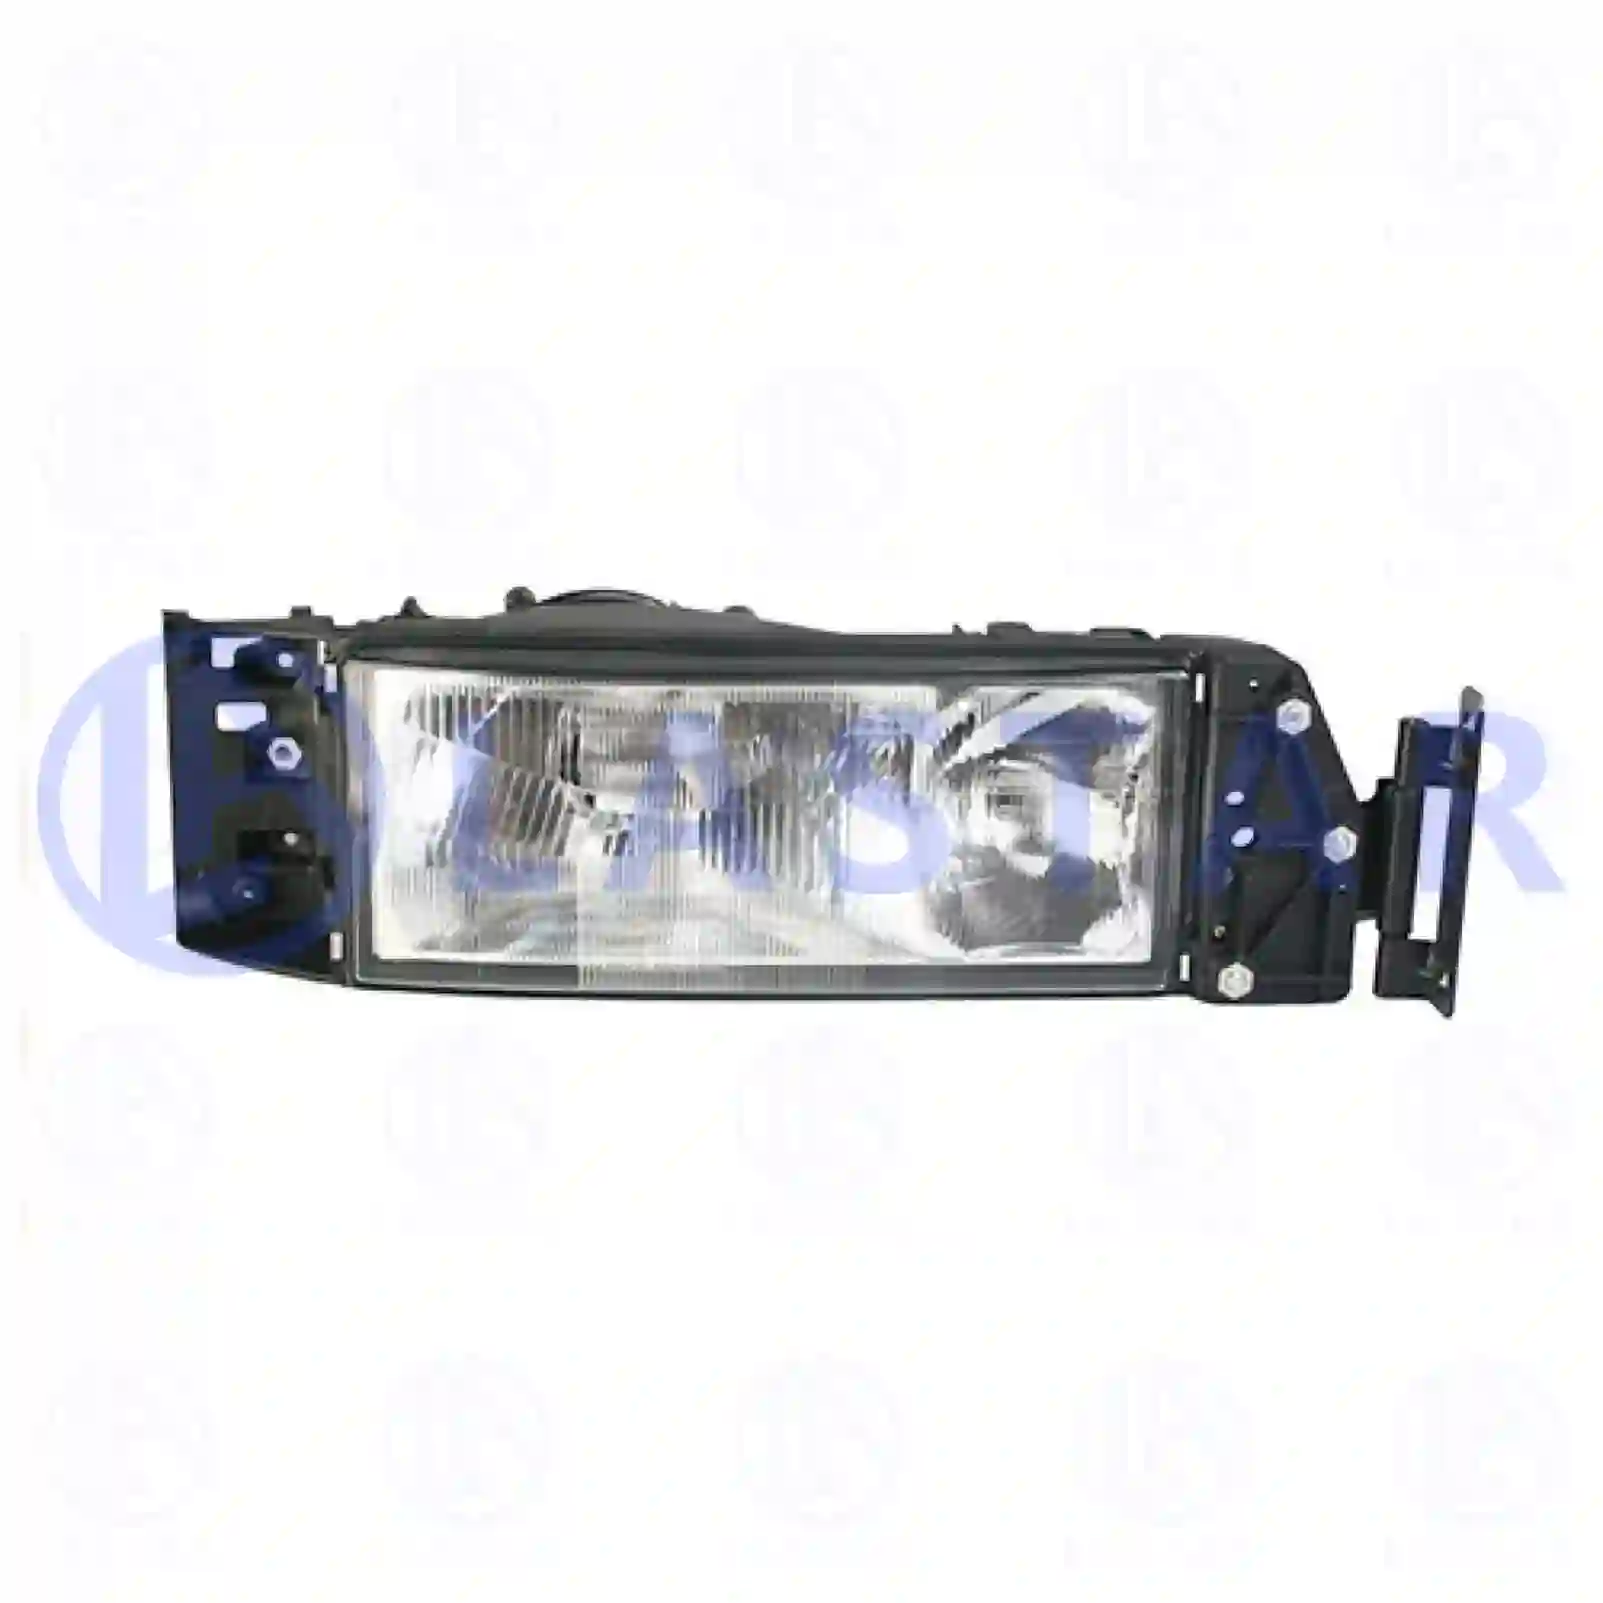 Headlamp, left, without bulb, 77710778, 04861341, 4861341, 500305103, 500350103 ||  77710778 Lastar Spare Part | Truck Spare Parts, Auotomotive Spare Parts Headlamp, left, without bulb, 77710778, 04861341, 4861341, 500305103, 500350103 ||  77710778 Lastar Spare Part | Truck Spare Parts, Auotomotive Spare Parts